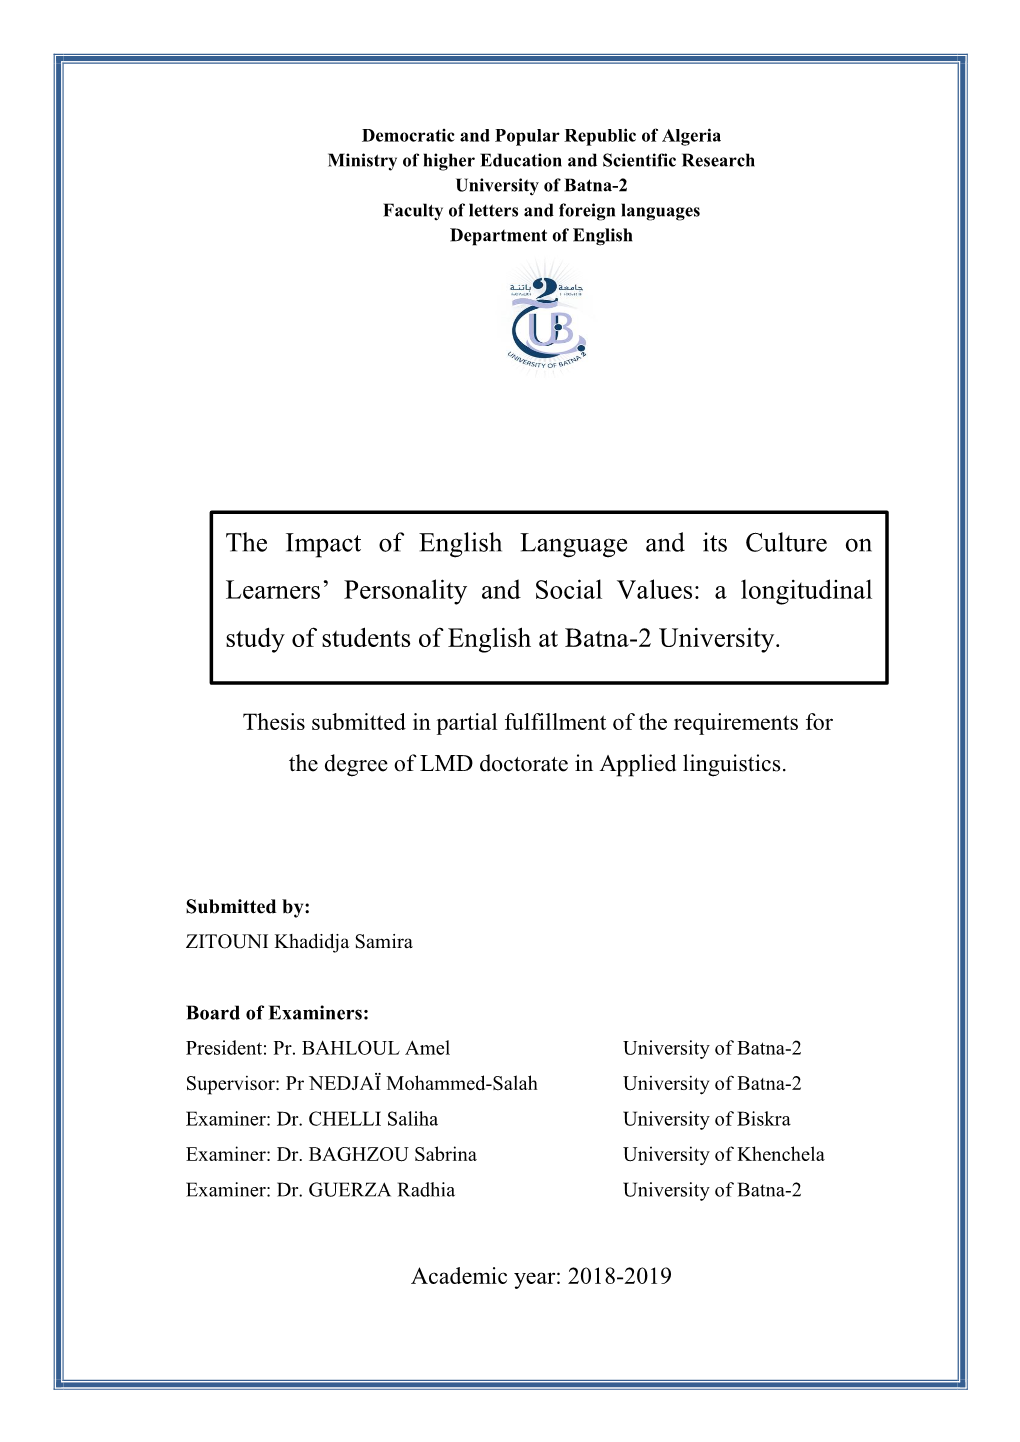 The Impact of English Language and Its Culture on Learners' Personality